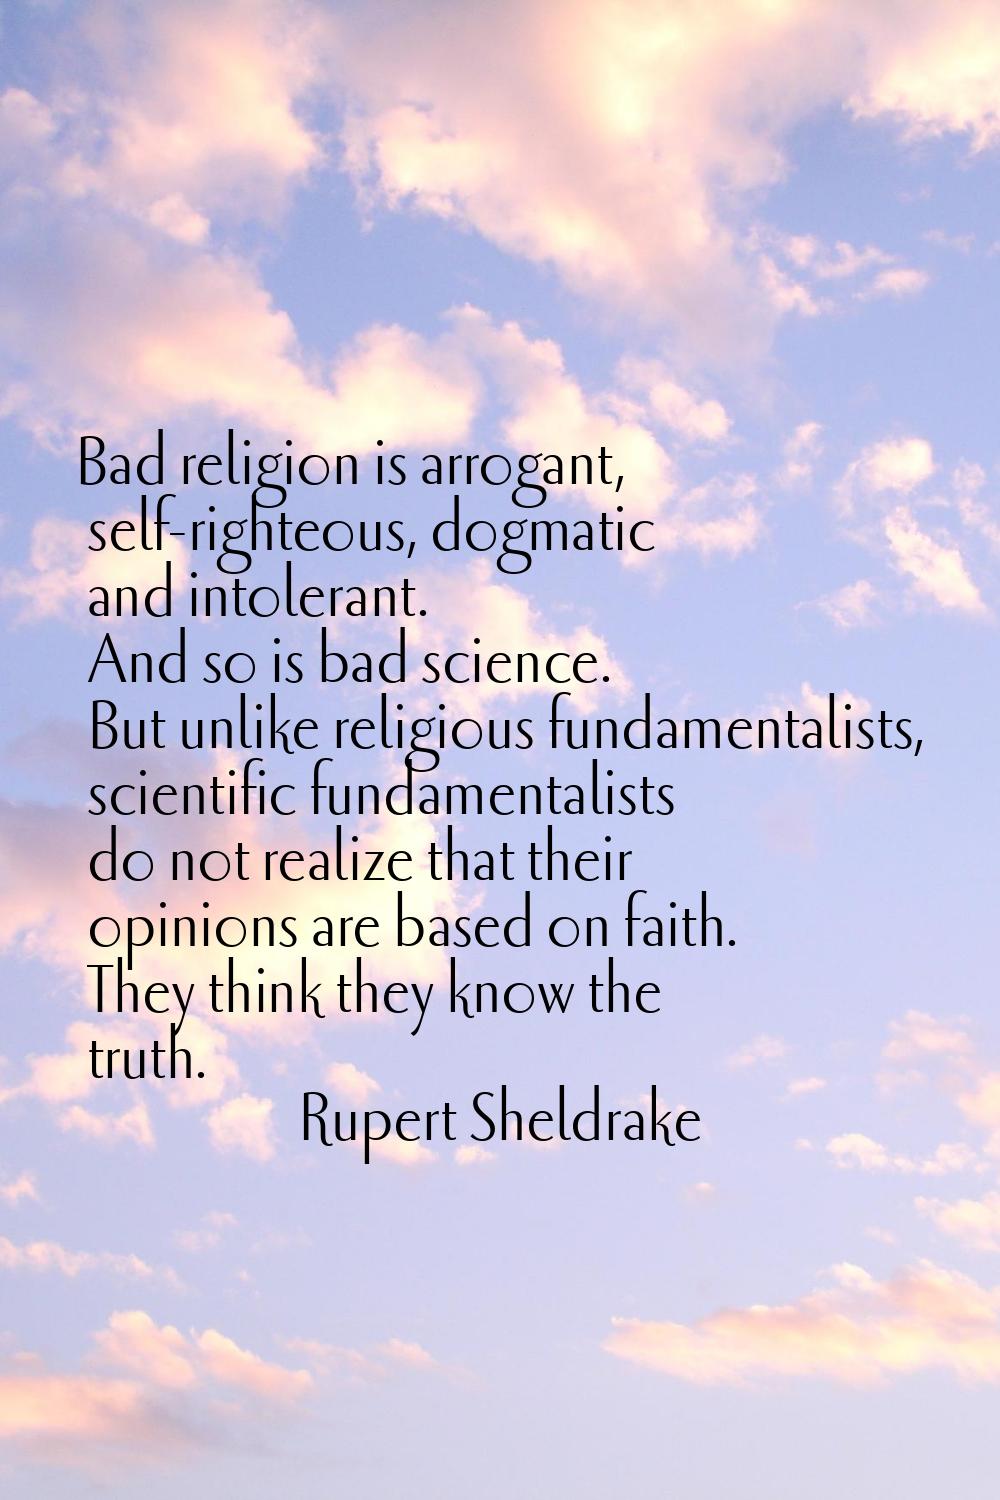 Bad religion is arrogant, self-righteous, dogmatic and intolerant. And so is bad science. But unlik